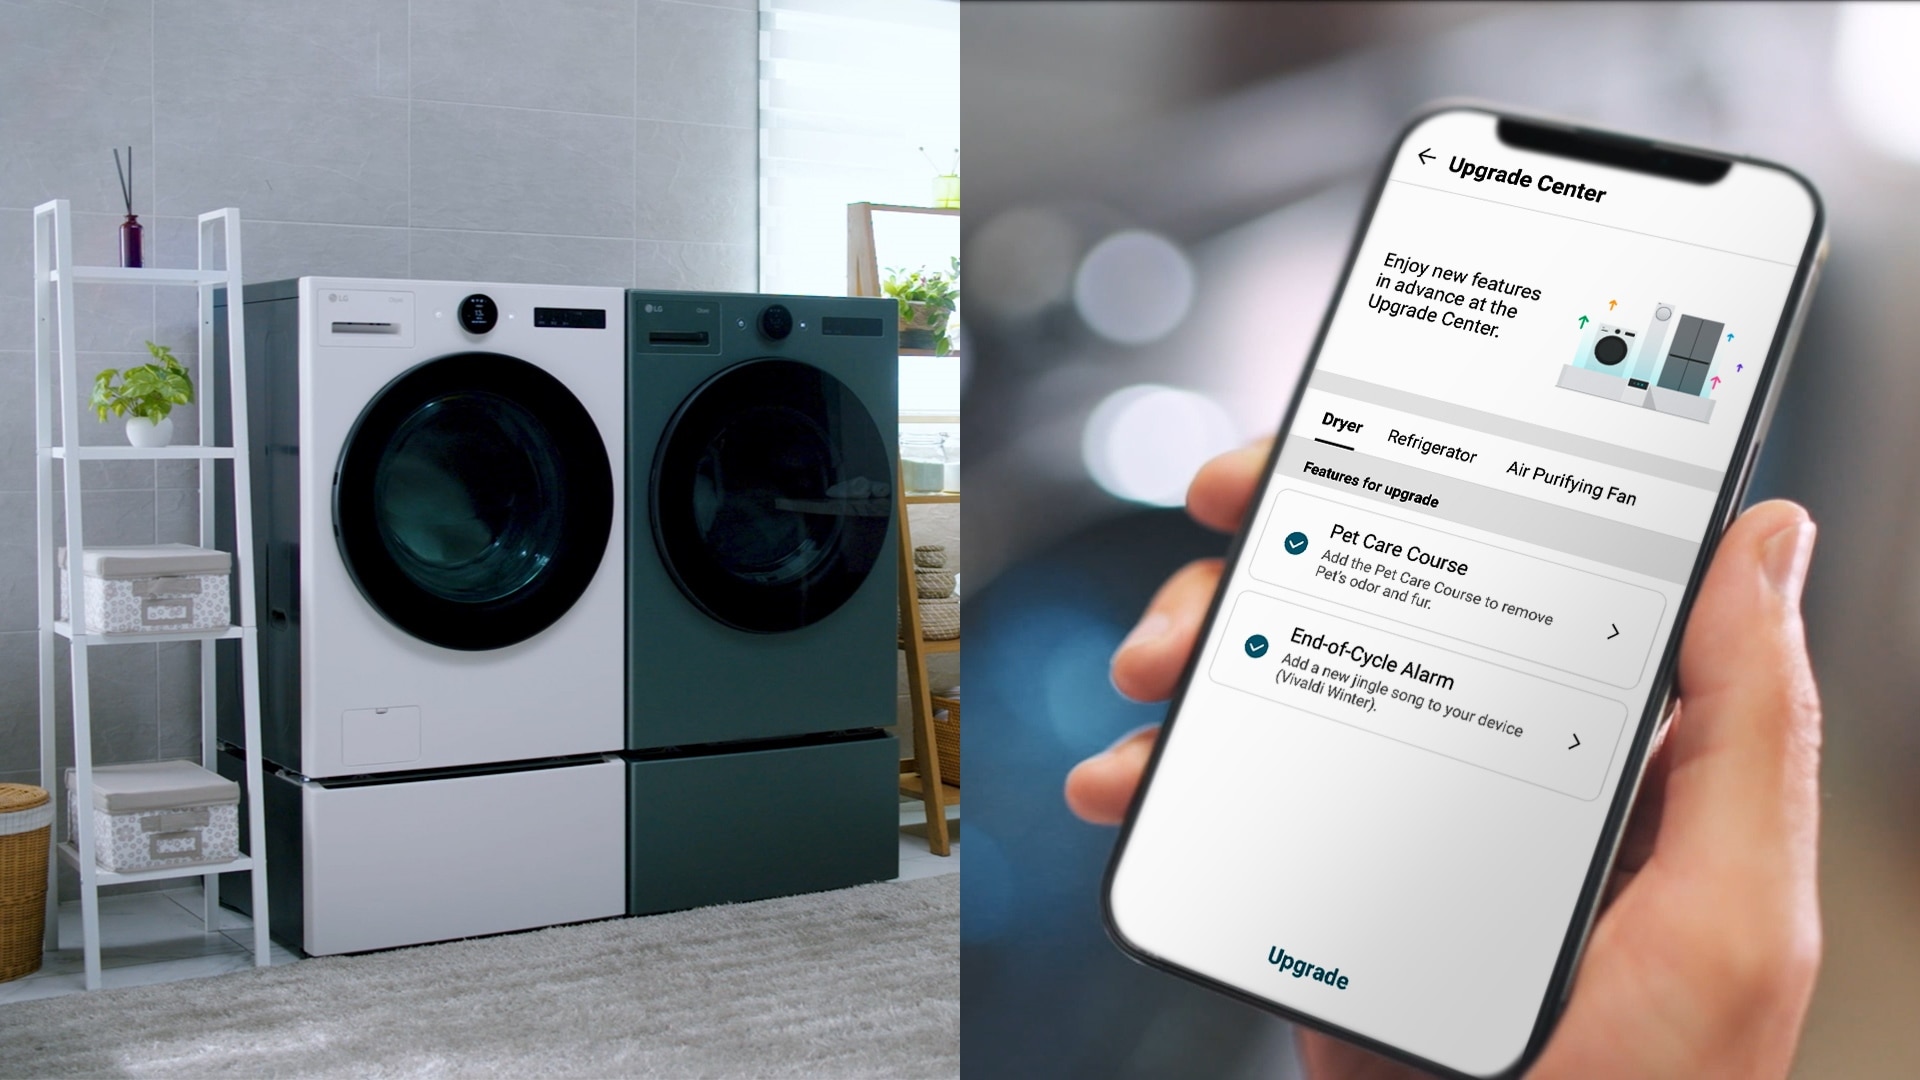 LG Upgradeable Appliances connect with LG ThinQ.